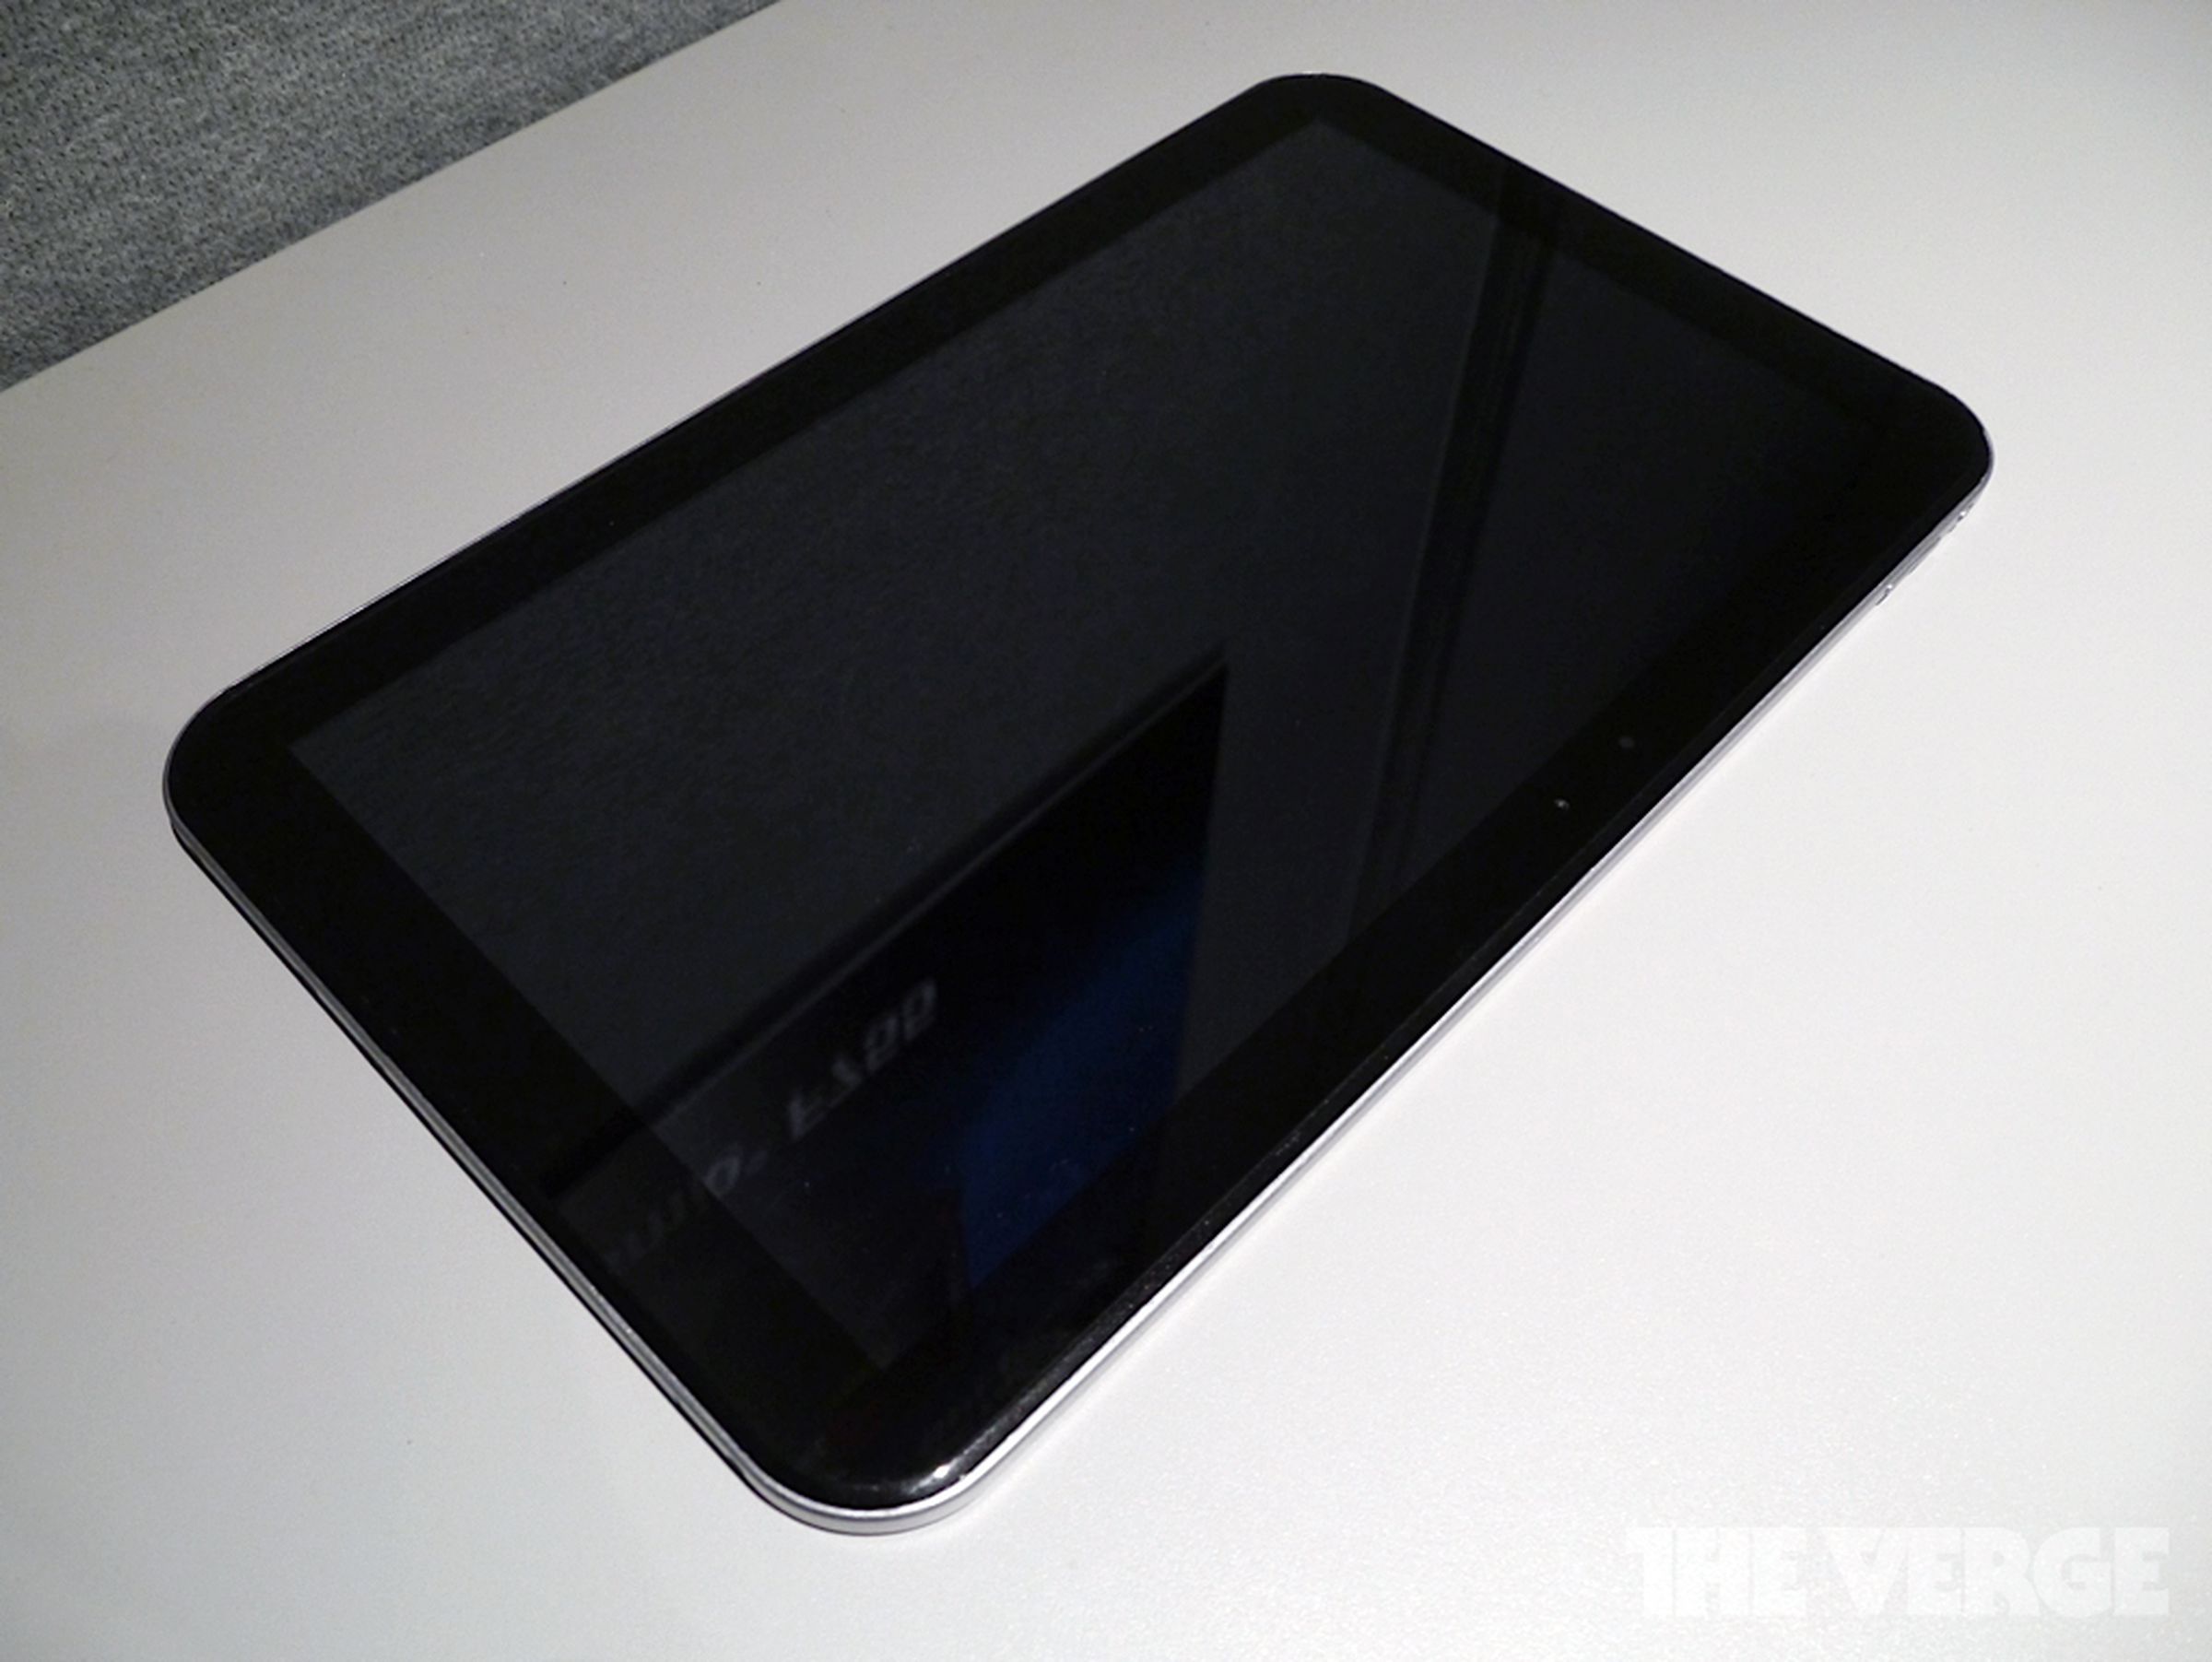 Toshiba's 21:9 phone and tablet prototypes hands-on picture